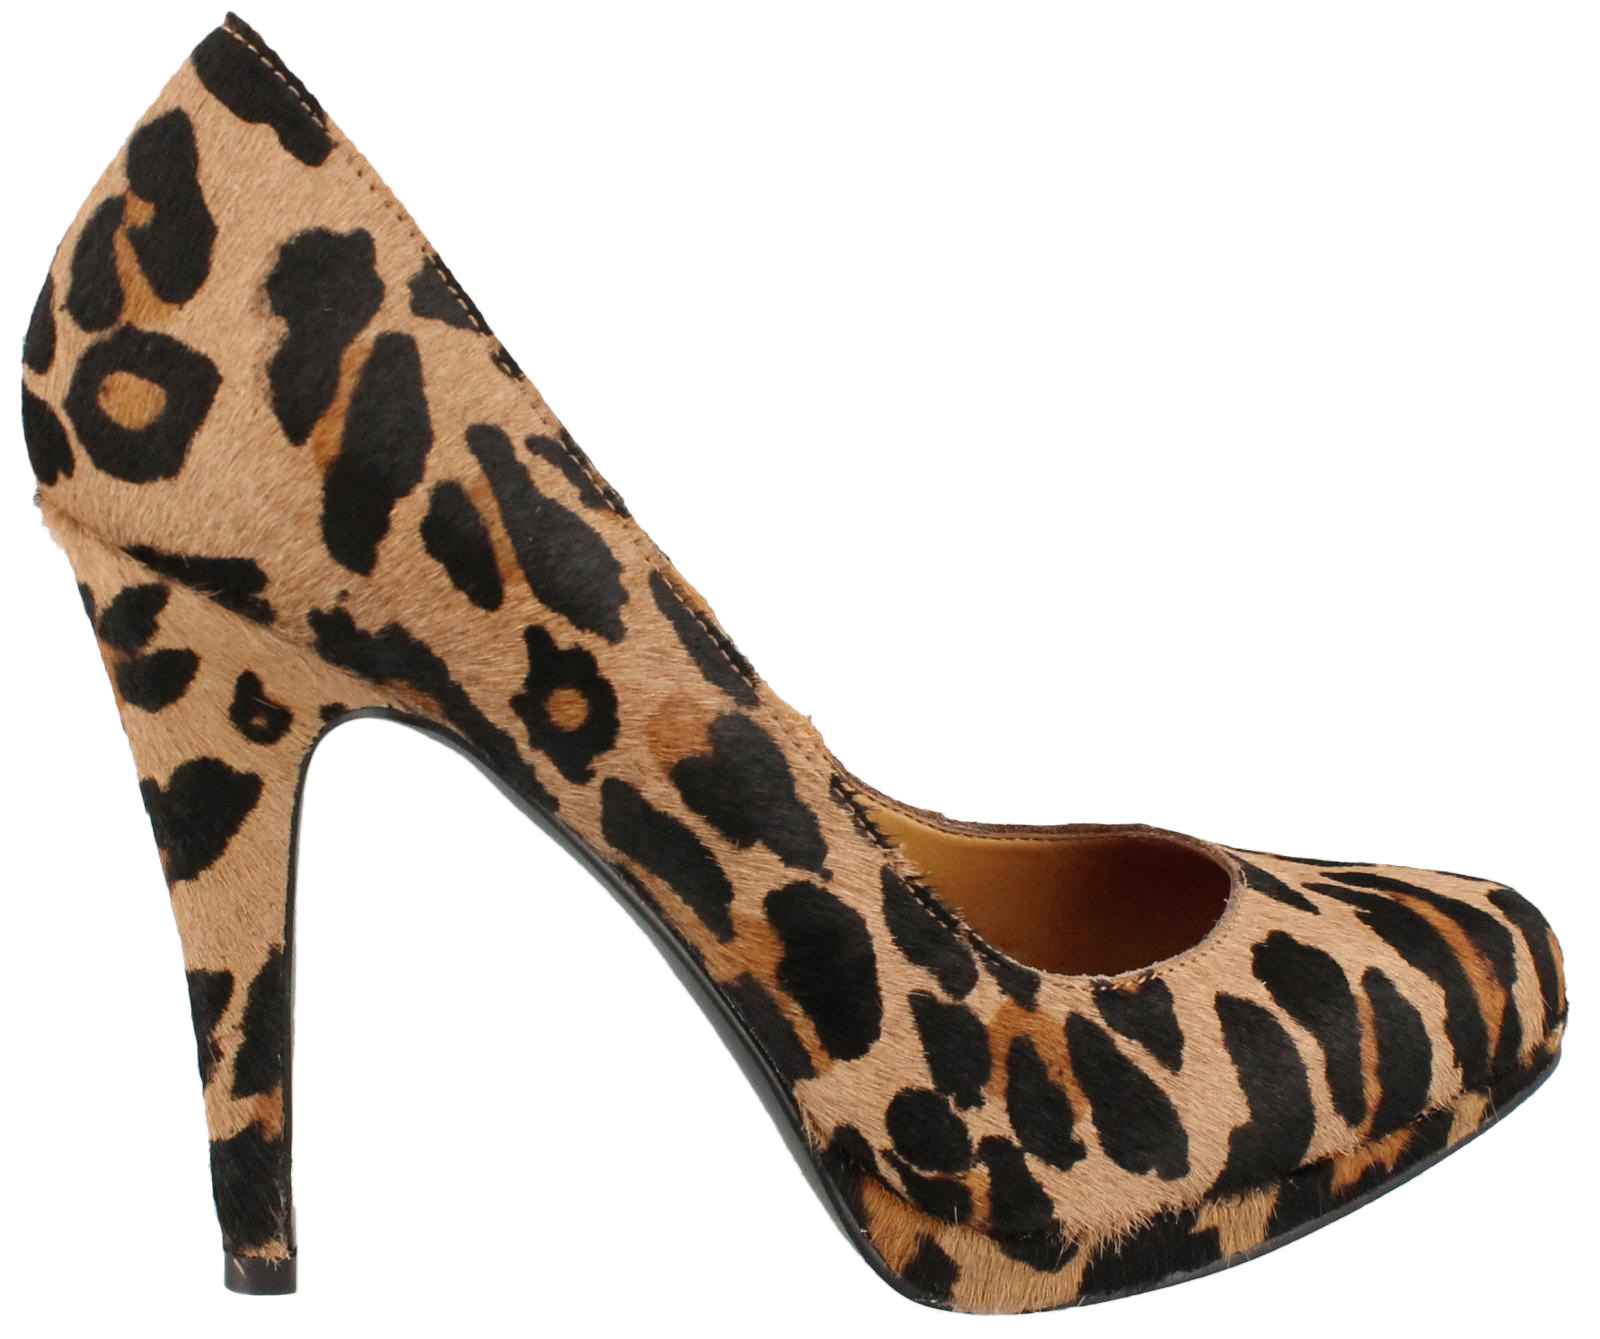 3 crucial tips to wearing leopard print shoes KDQMWBV